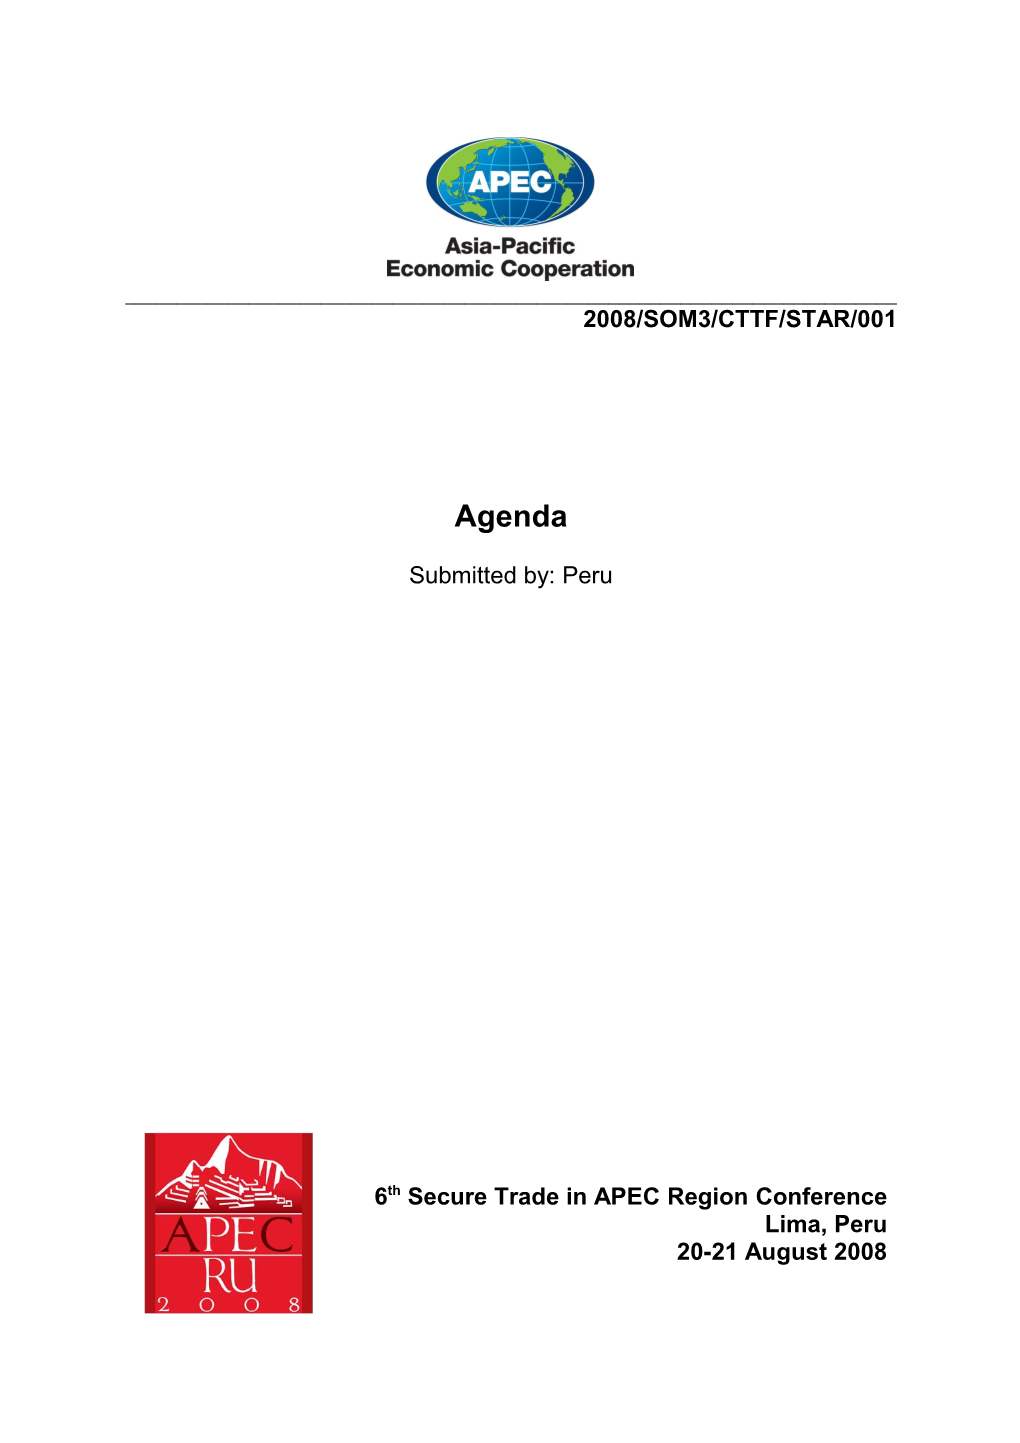 Sixth Secure Trade in the APEC Region's Conference (STAR VI)